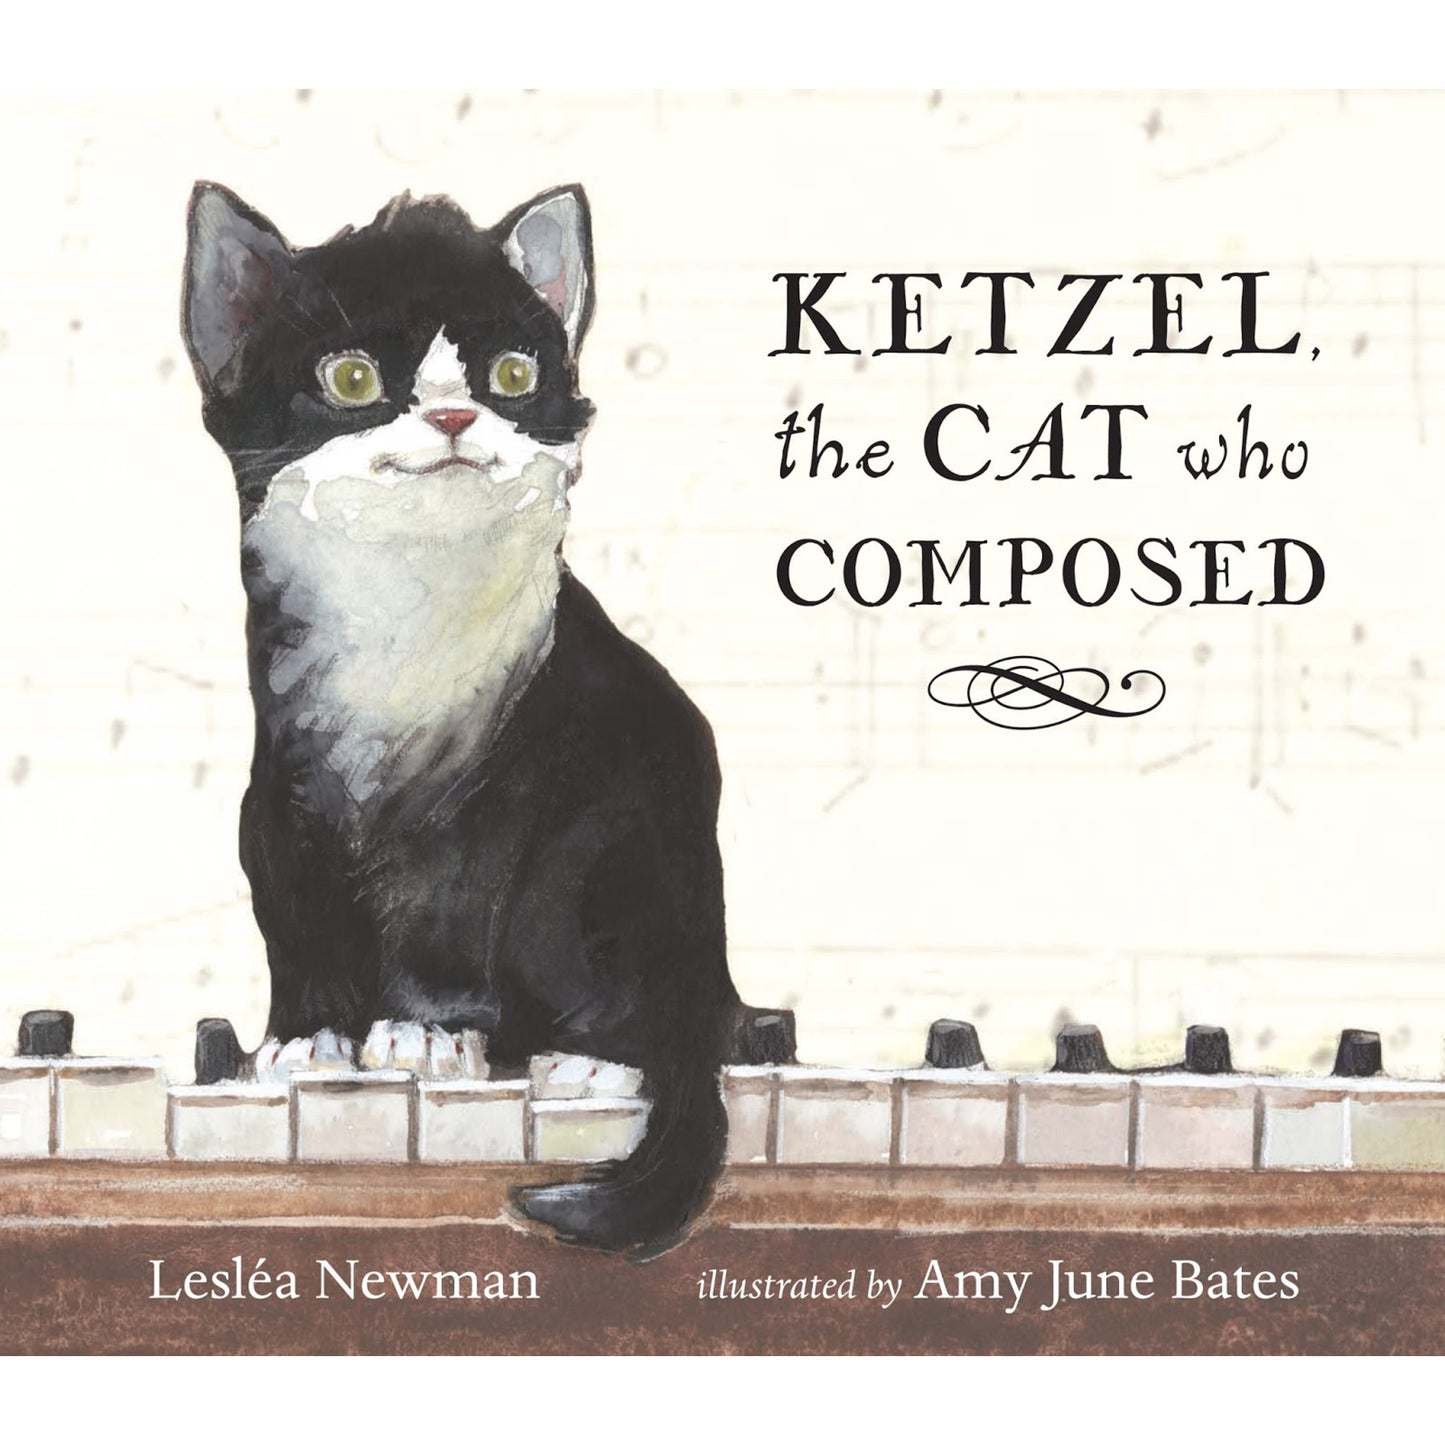 Ketzel, the Cat Who Composed, Newman